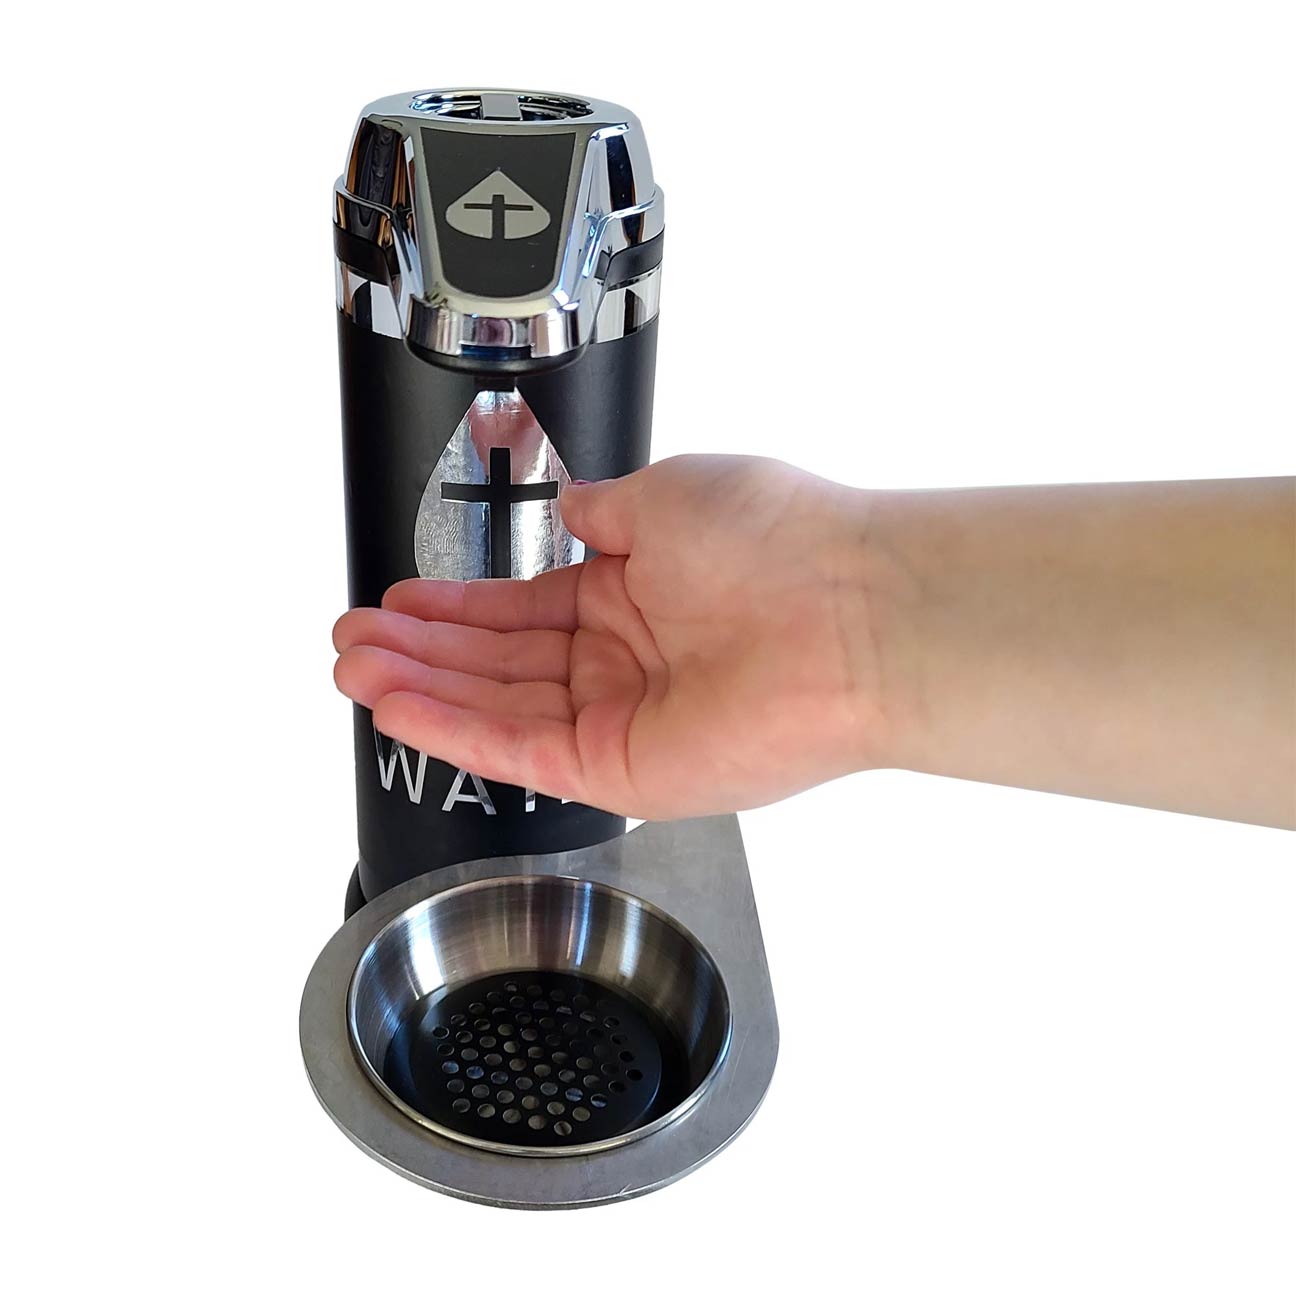 https://shop.catholicsupply.com/Shared/Images/Product/Automatic-Touchless-Holy-Water-Dispenser/118794-4.jpg